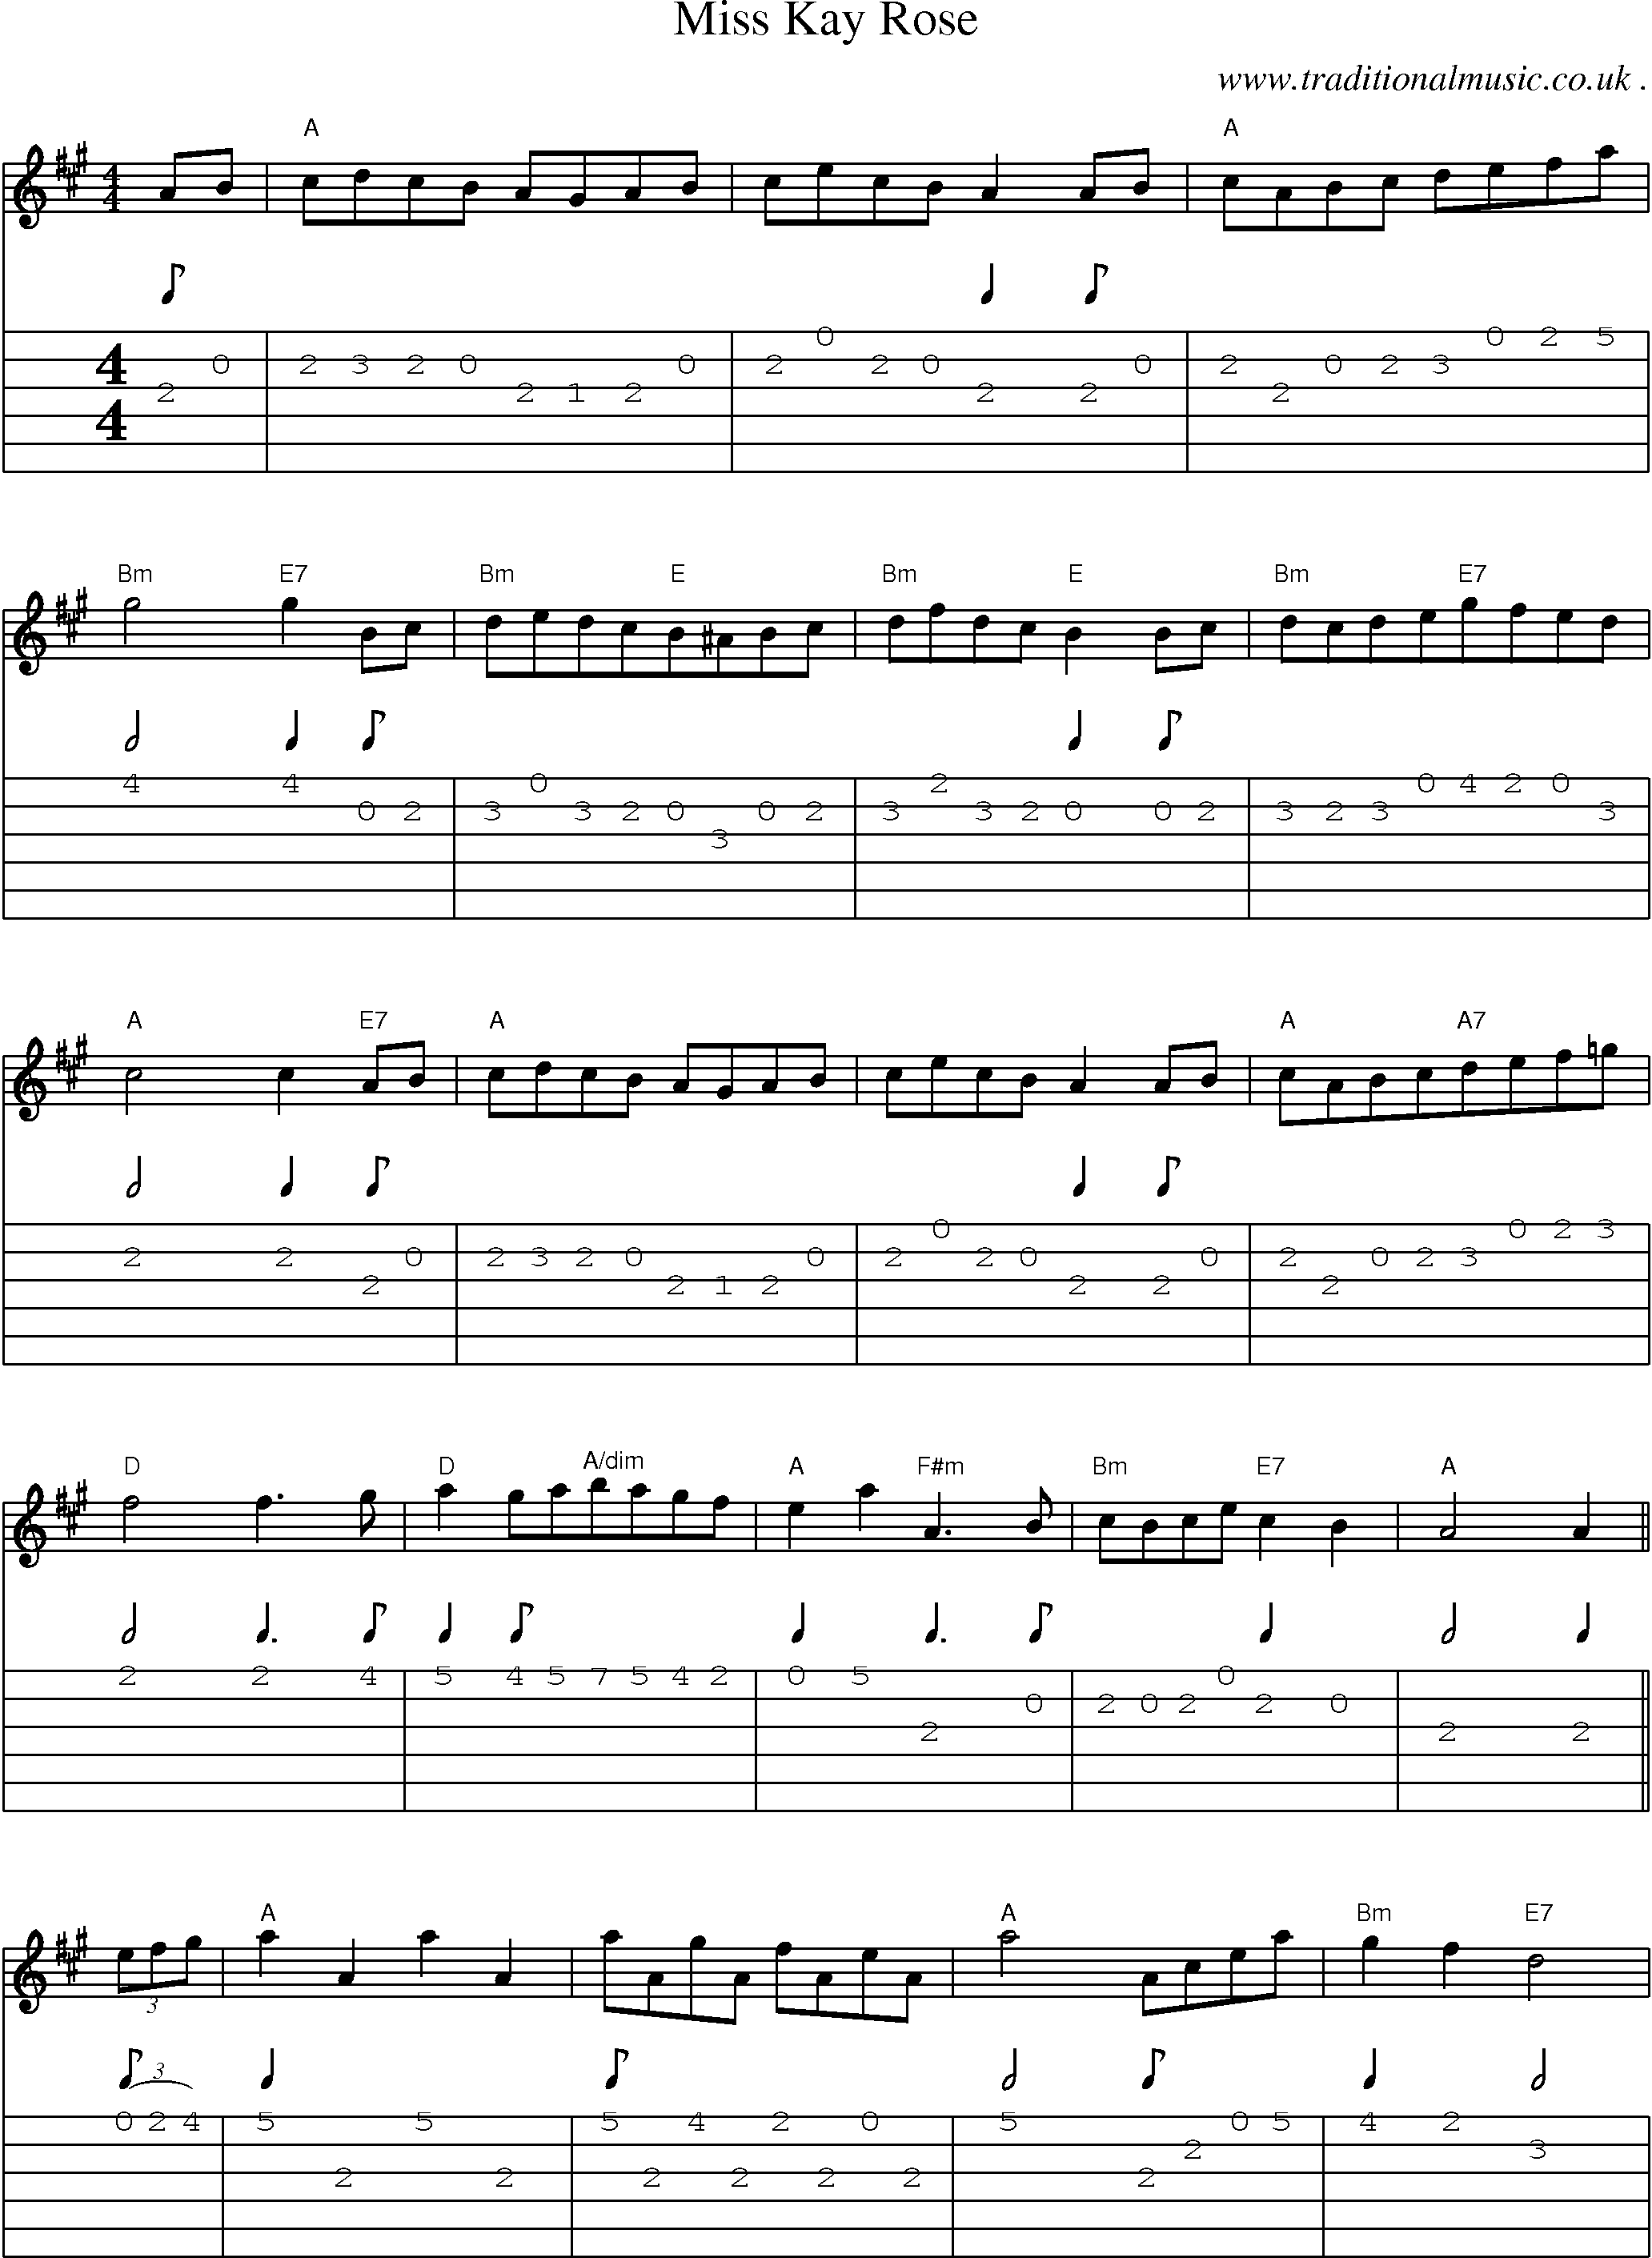 Sheet-Music and Guitar Tabs for Miss Kay Rose